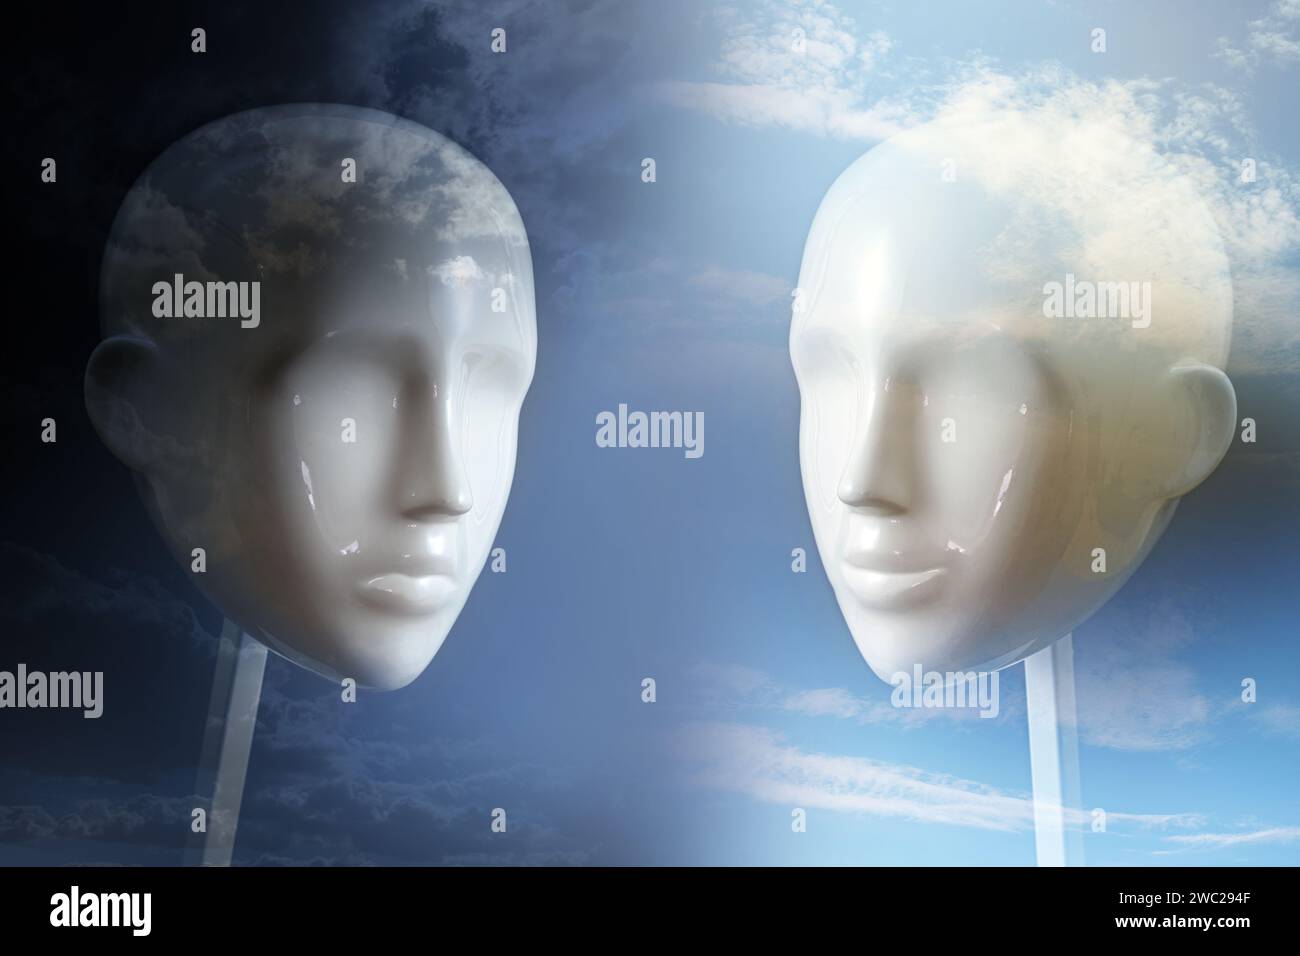 Negative versus positive thinking and emotion, psychology concept shown with two neutral colored mannequin heads and corresponding dark and light sky, Stock Photo